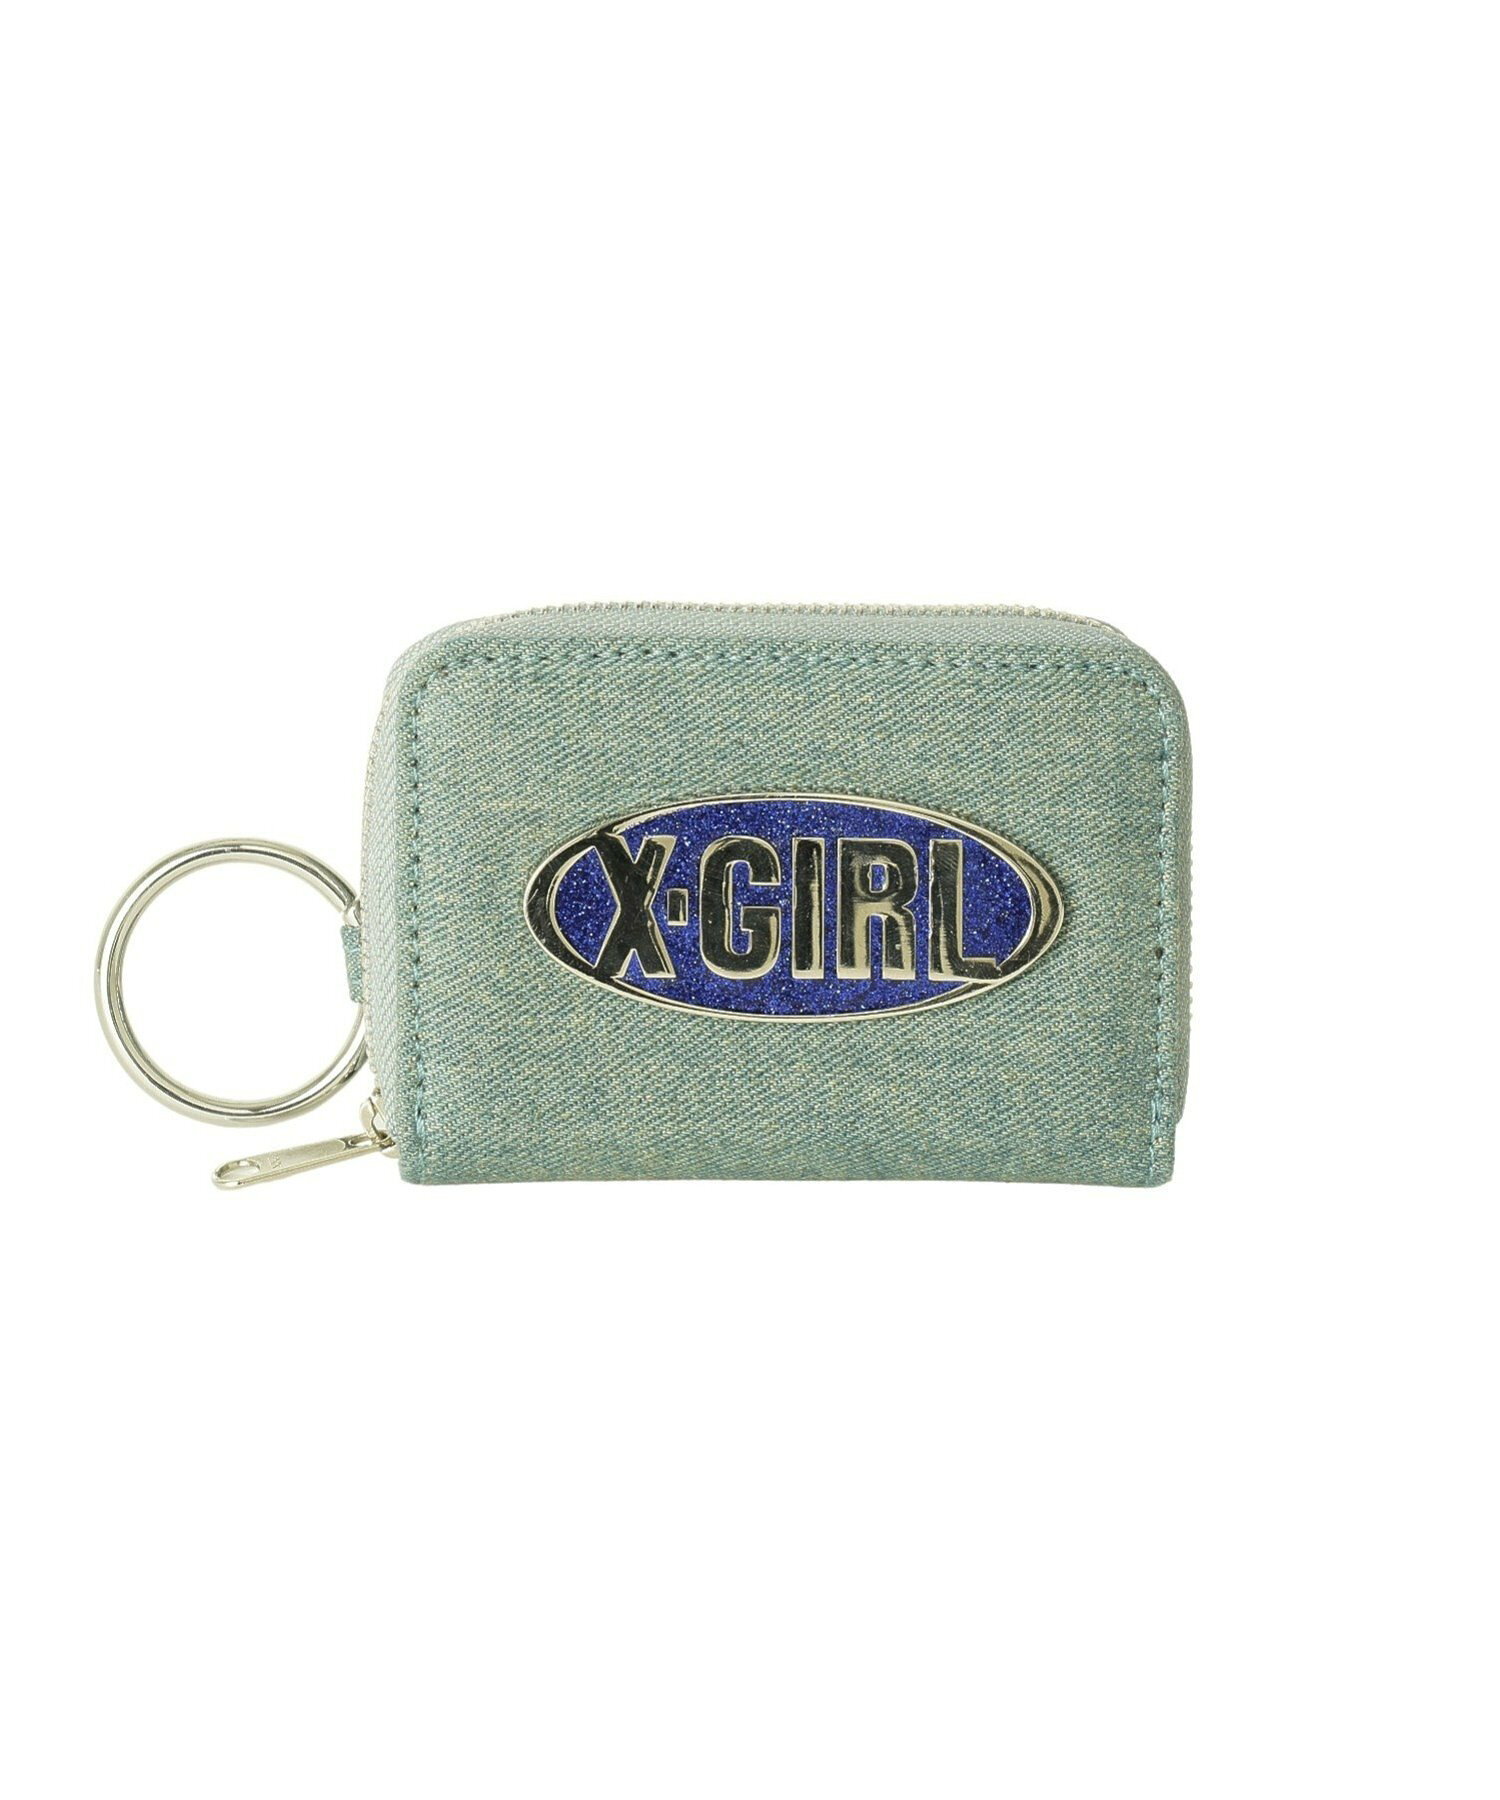 GLITTER OVAL LOGO COIN AND CARD CASE コインケース カードケース  X-girl 